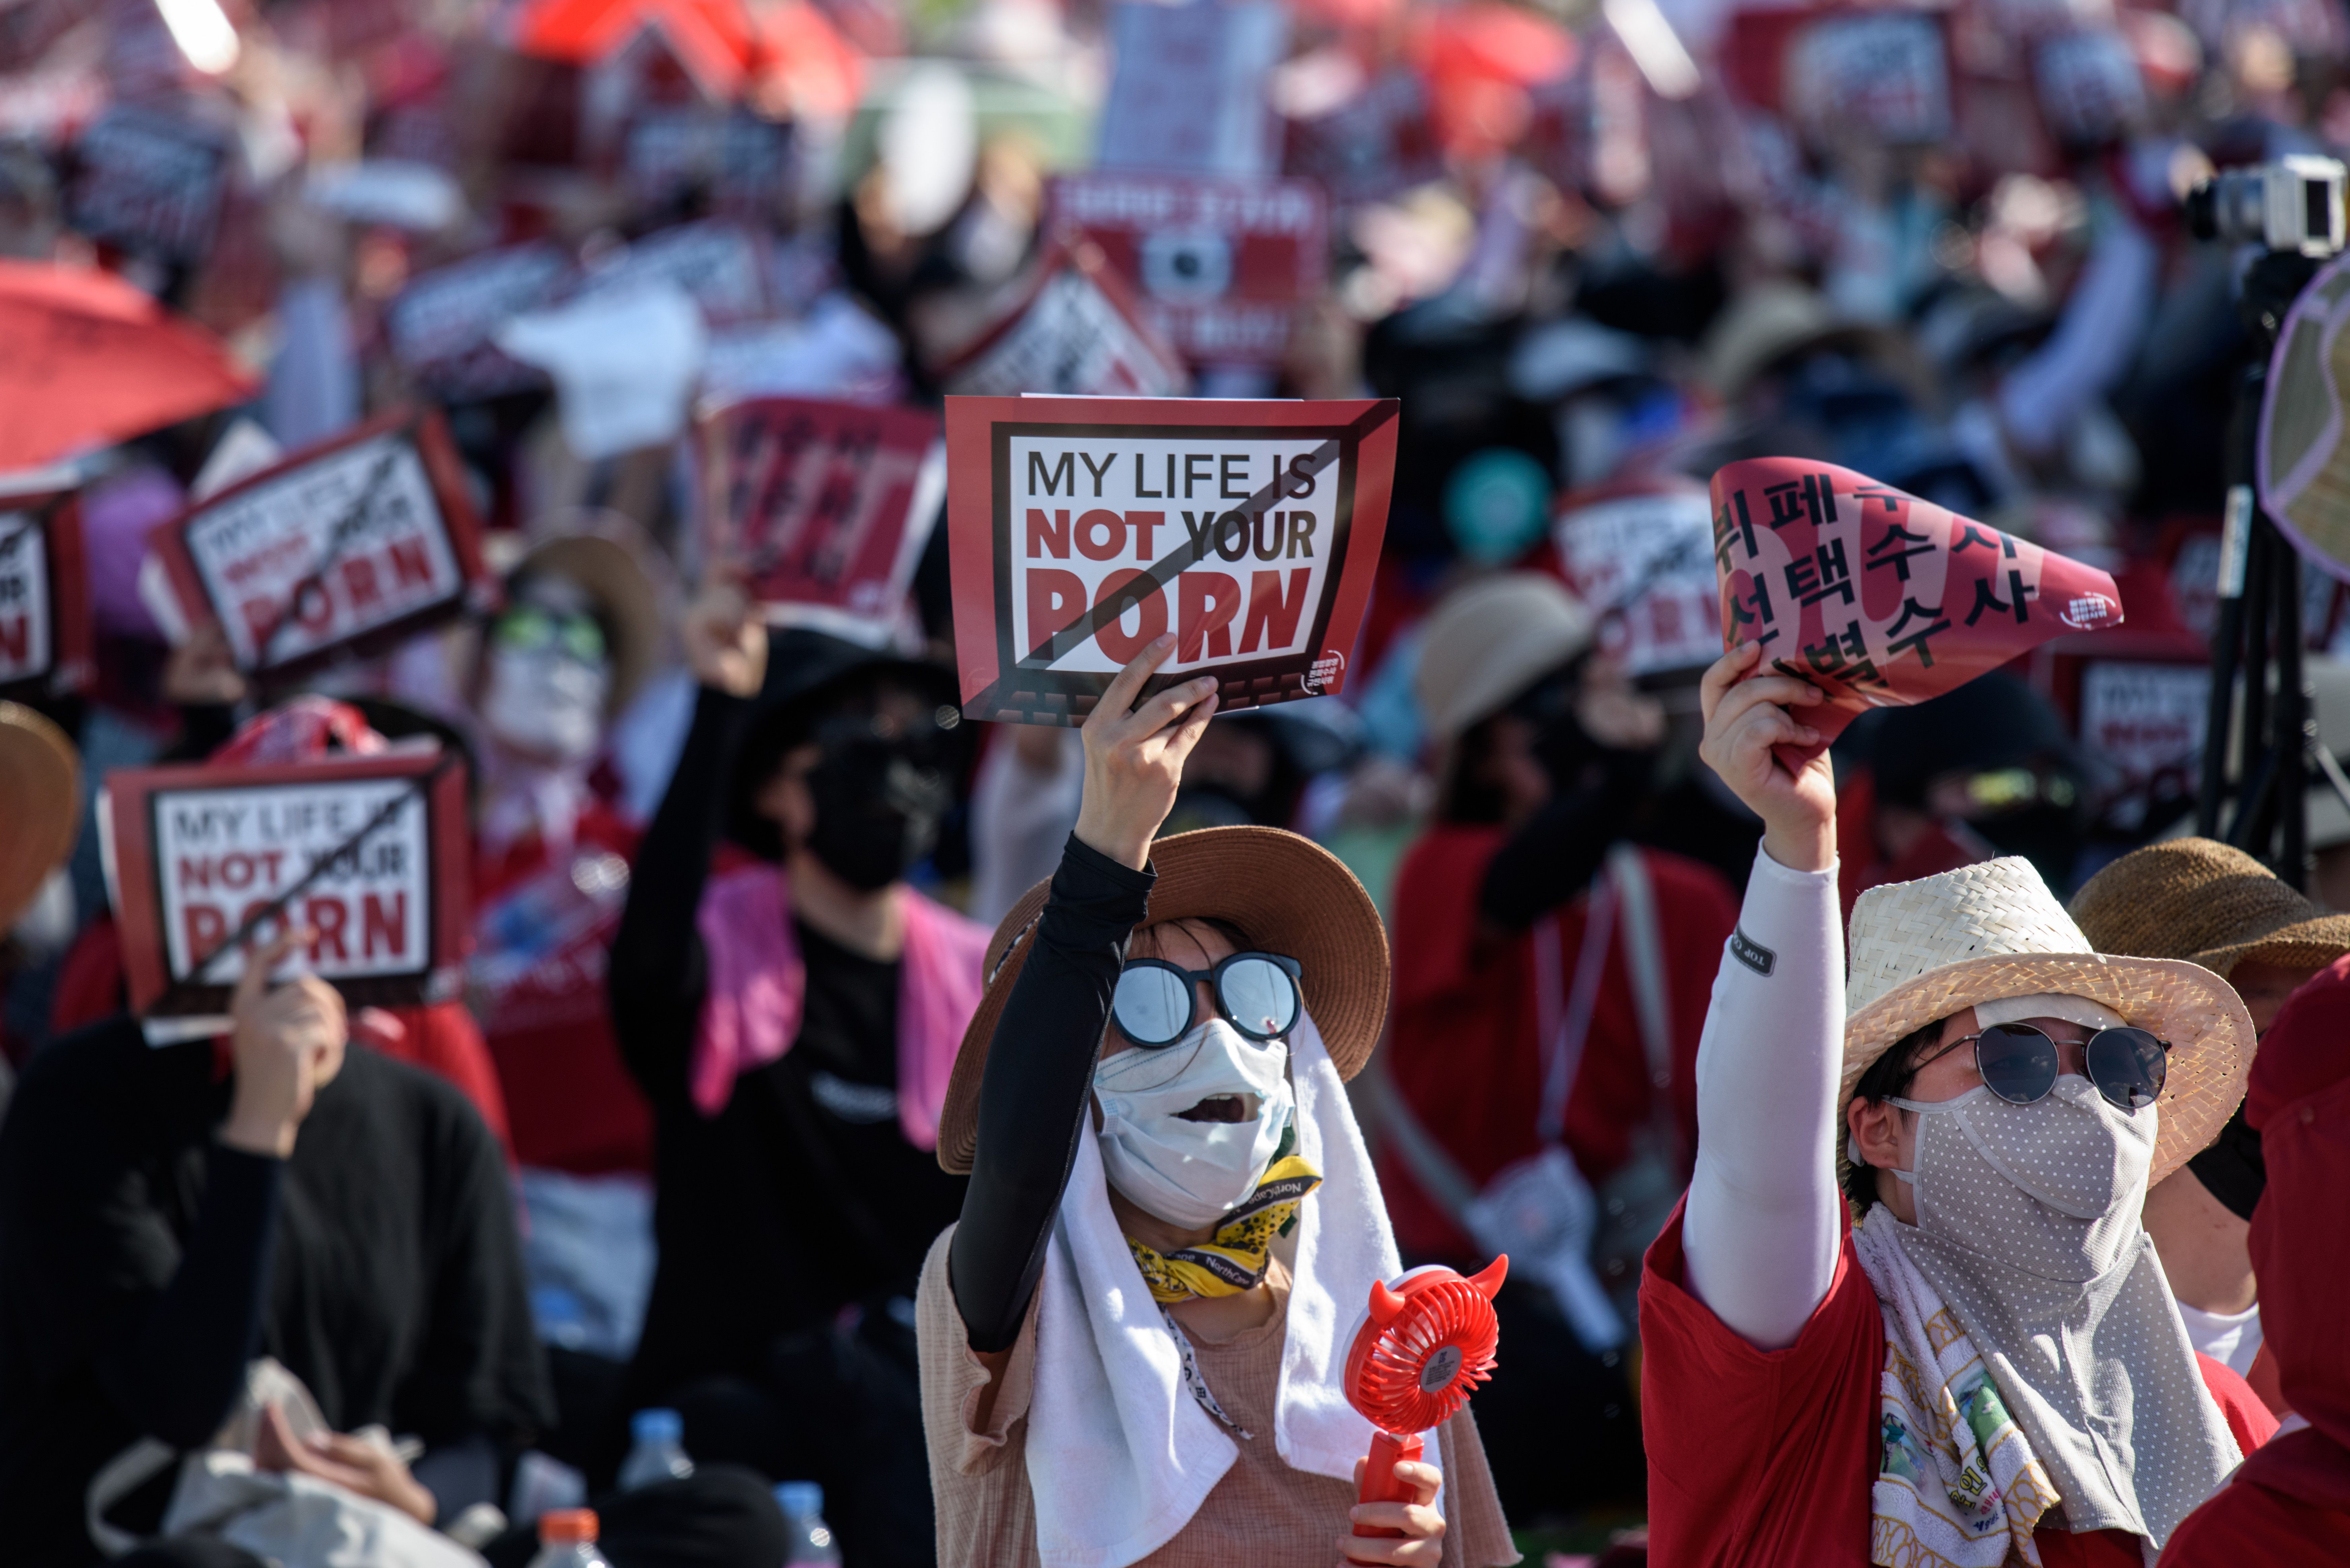 Female protesters shout slogans during a rally against 'spy-cam porn' in central Seoul on August 4, 2018. (ED JONES/AFP/Getty Images)